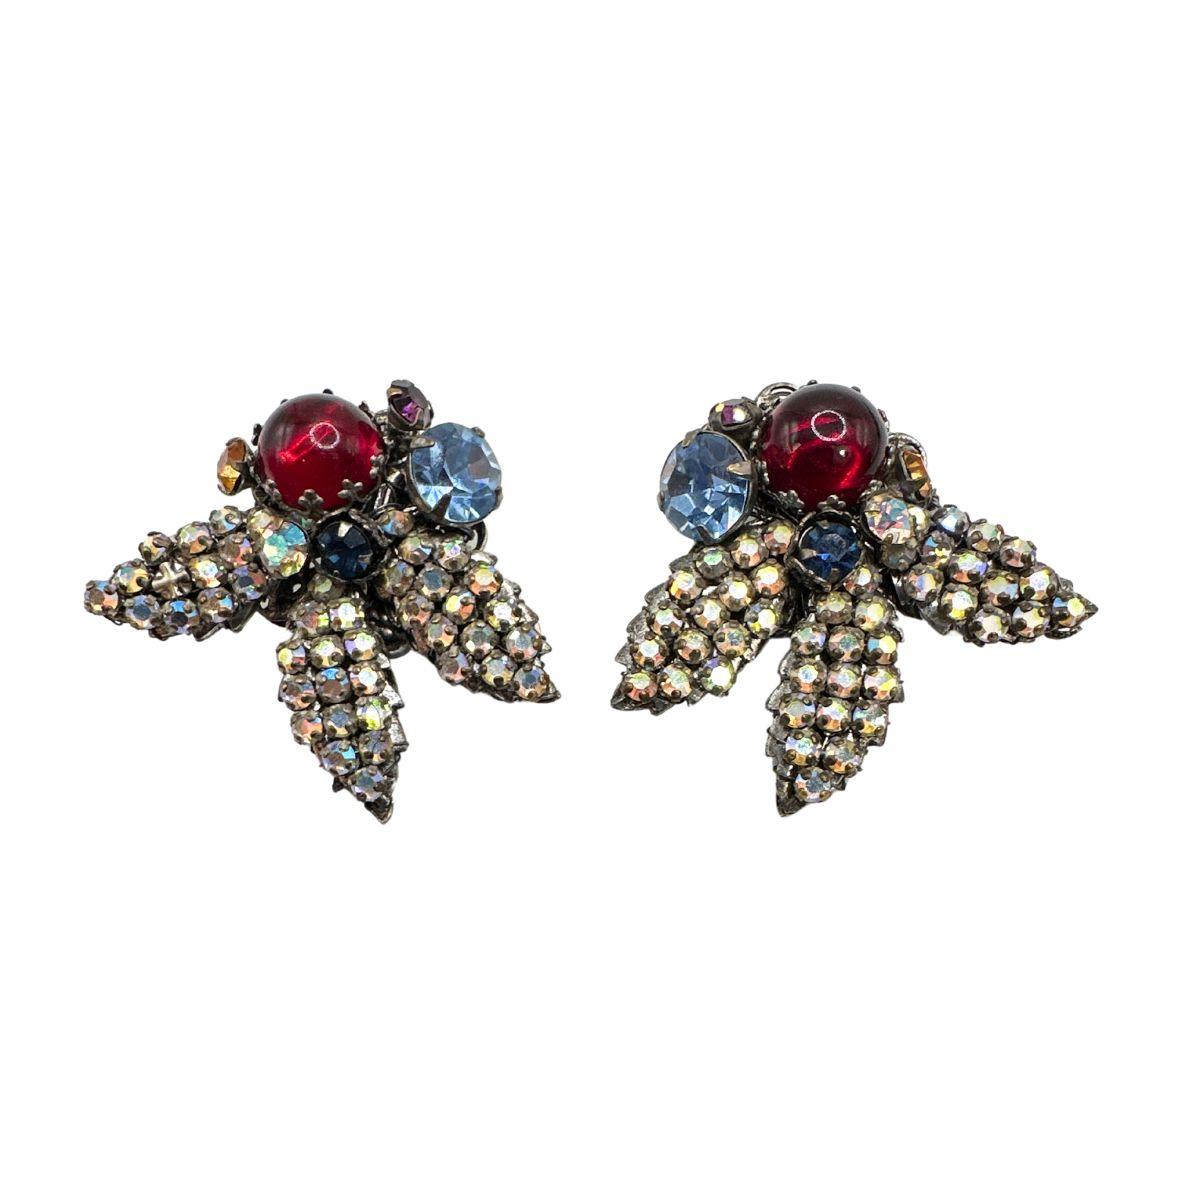  Signed  Demario Vintage Multi-Color Glass and Rhinestone Clip on Earrings  For Sale